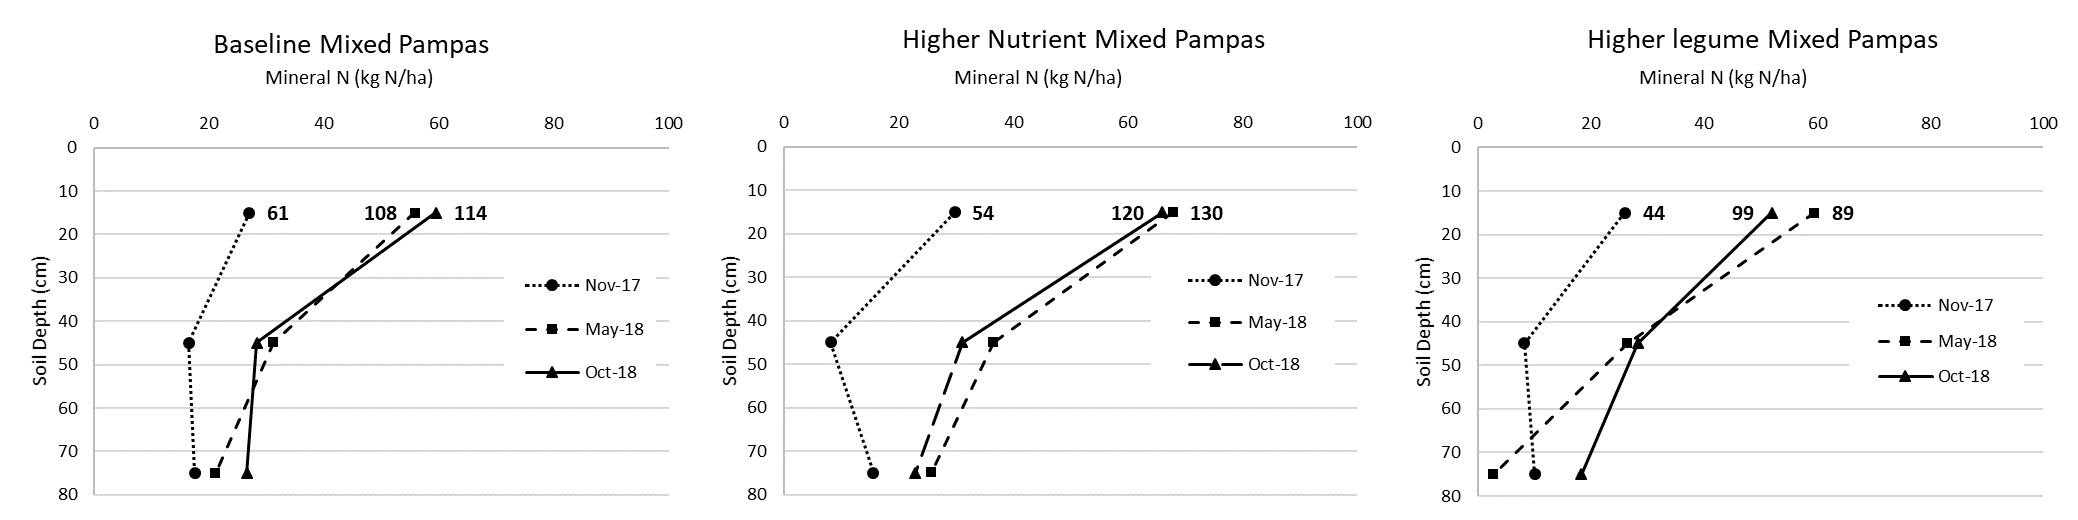 These three line graphs illustrate the distribution of mineral N placement within the soil profile over a long fallow period at Pampas site for baseline mixed, high nutrient mixed and higher legume mixed treatments